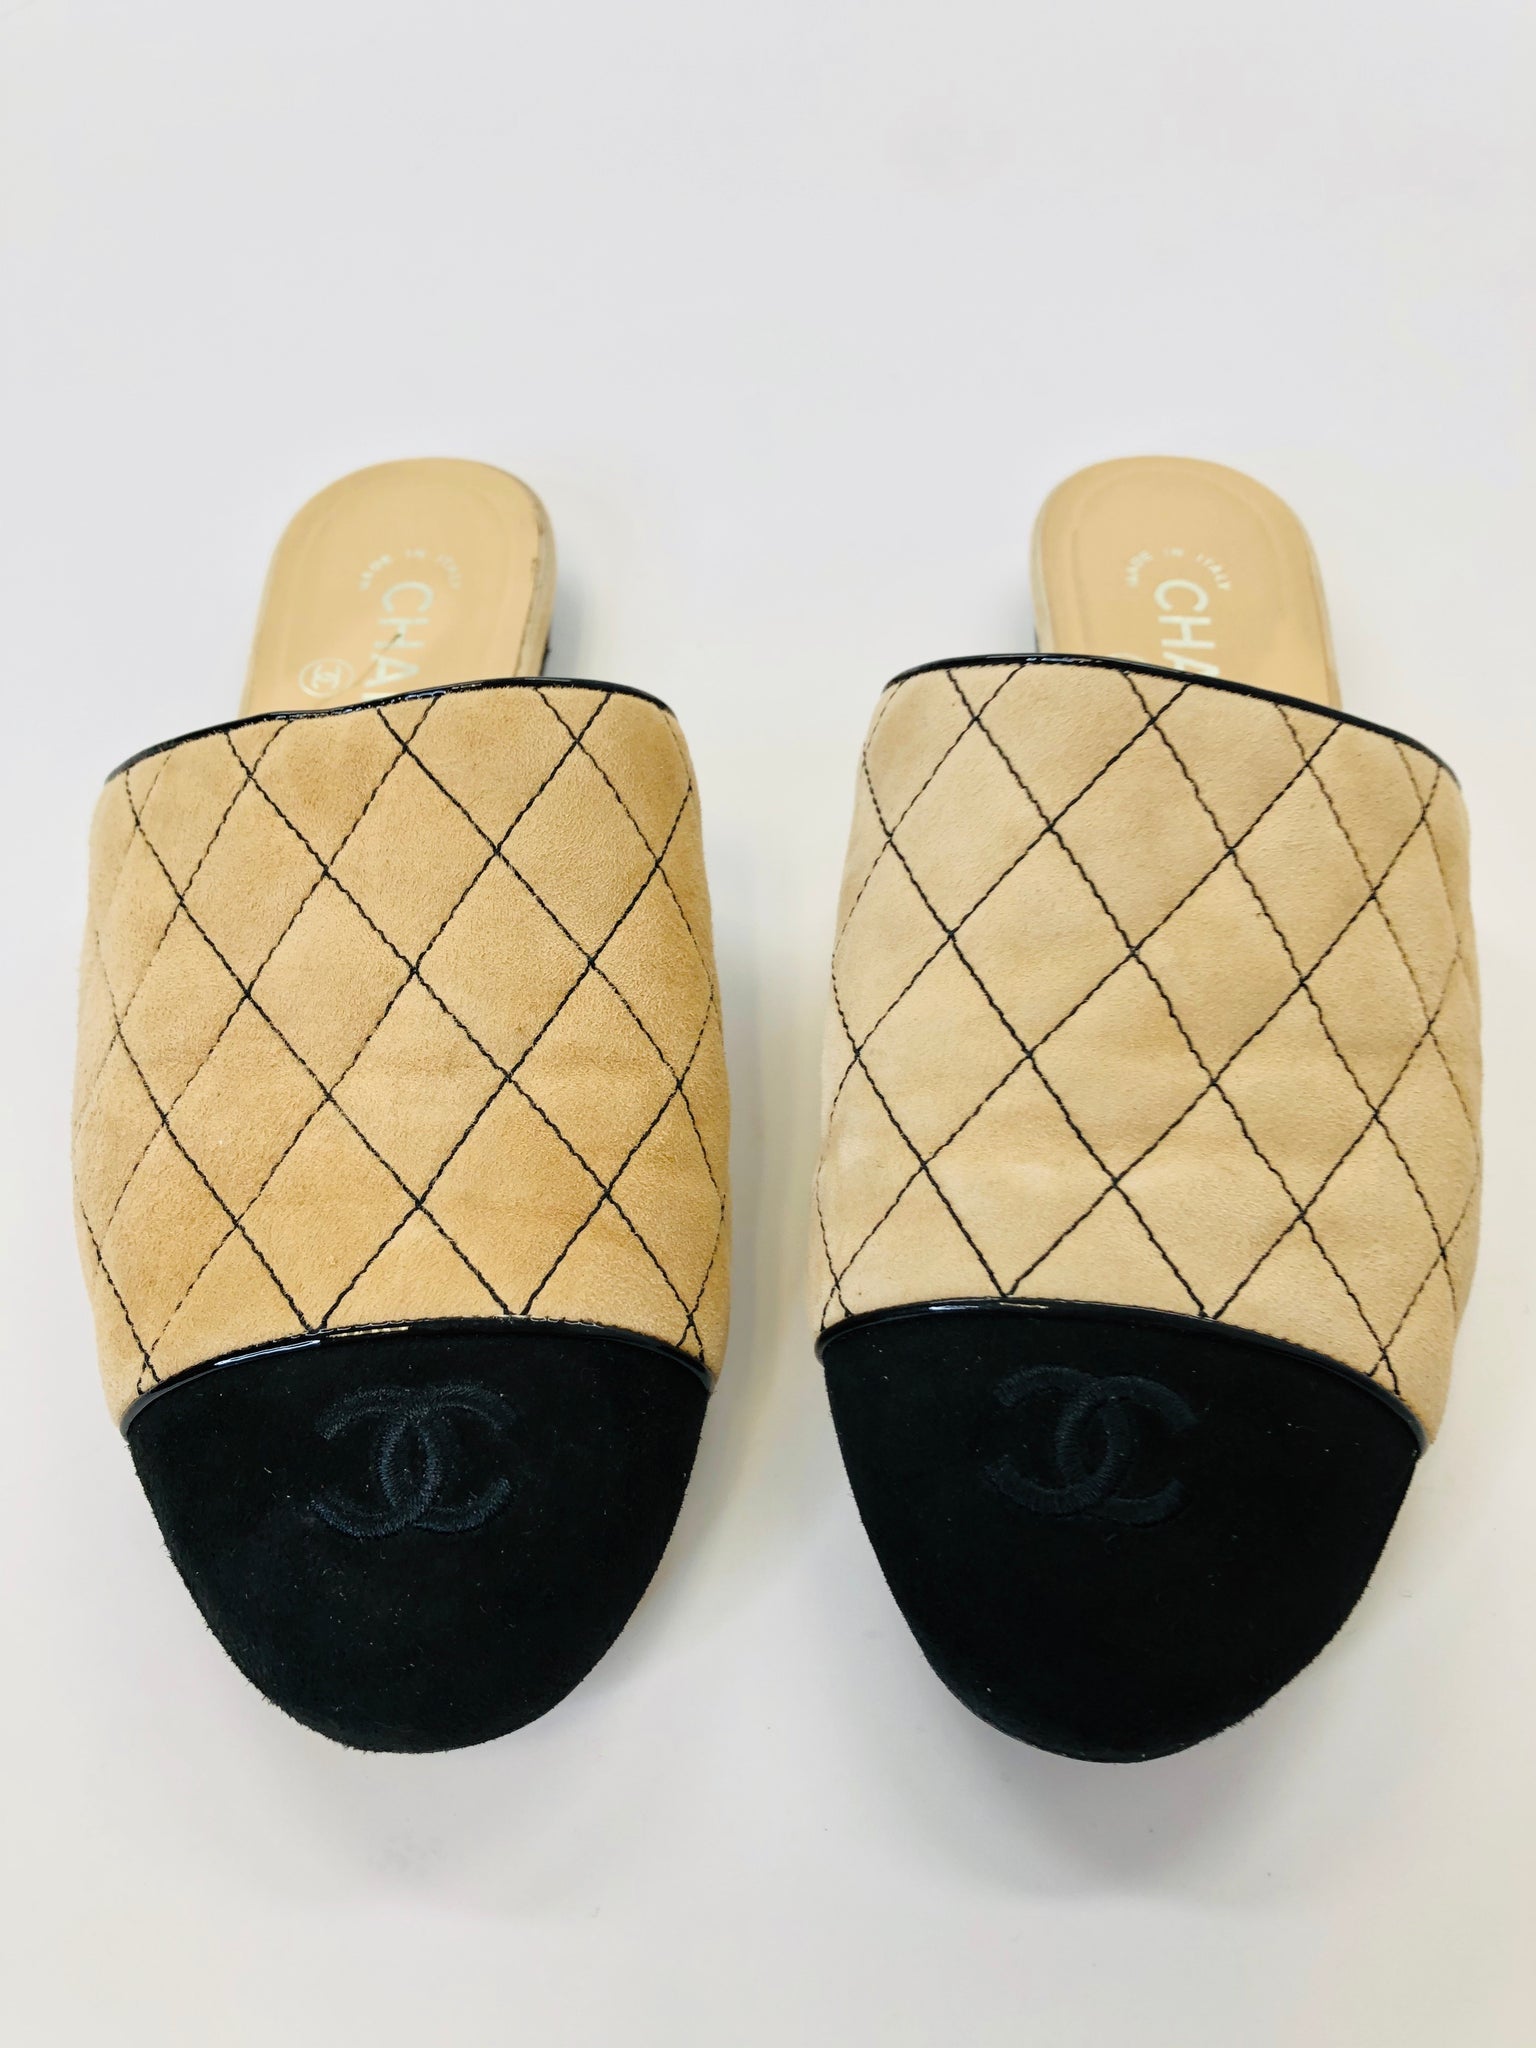 CHANEL PATENT LEATHER MULES SIZE 37 IT (7 US)